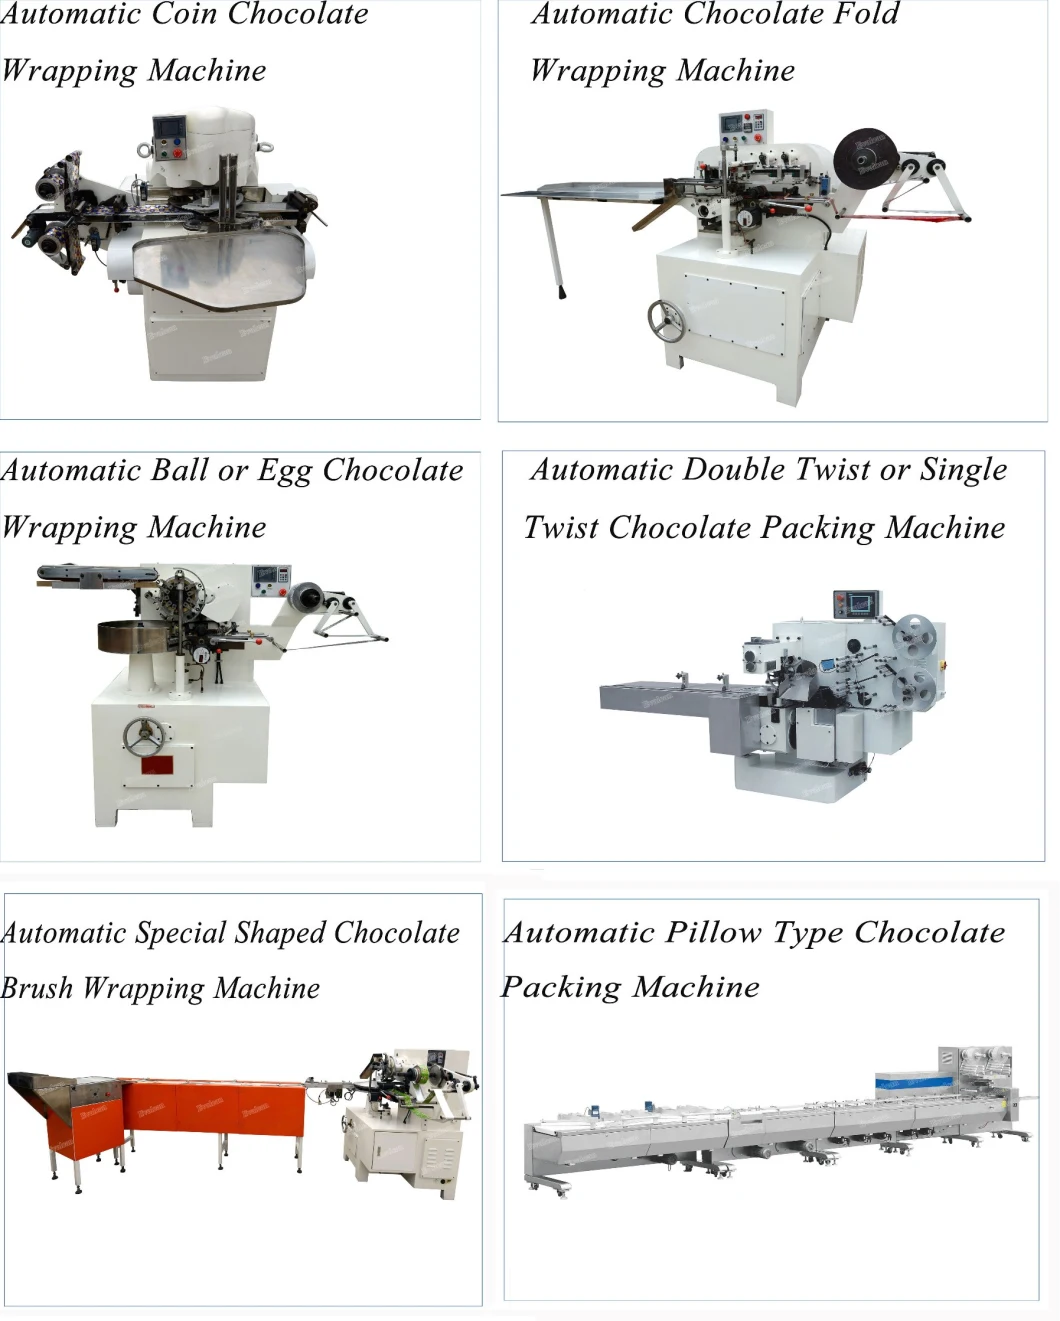 Automatic Double Twist Packaging Chocolate Wrapping Machine